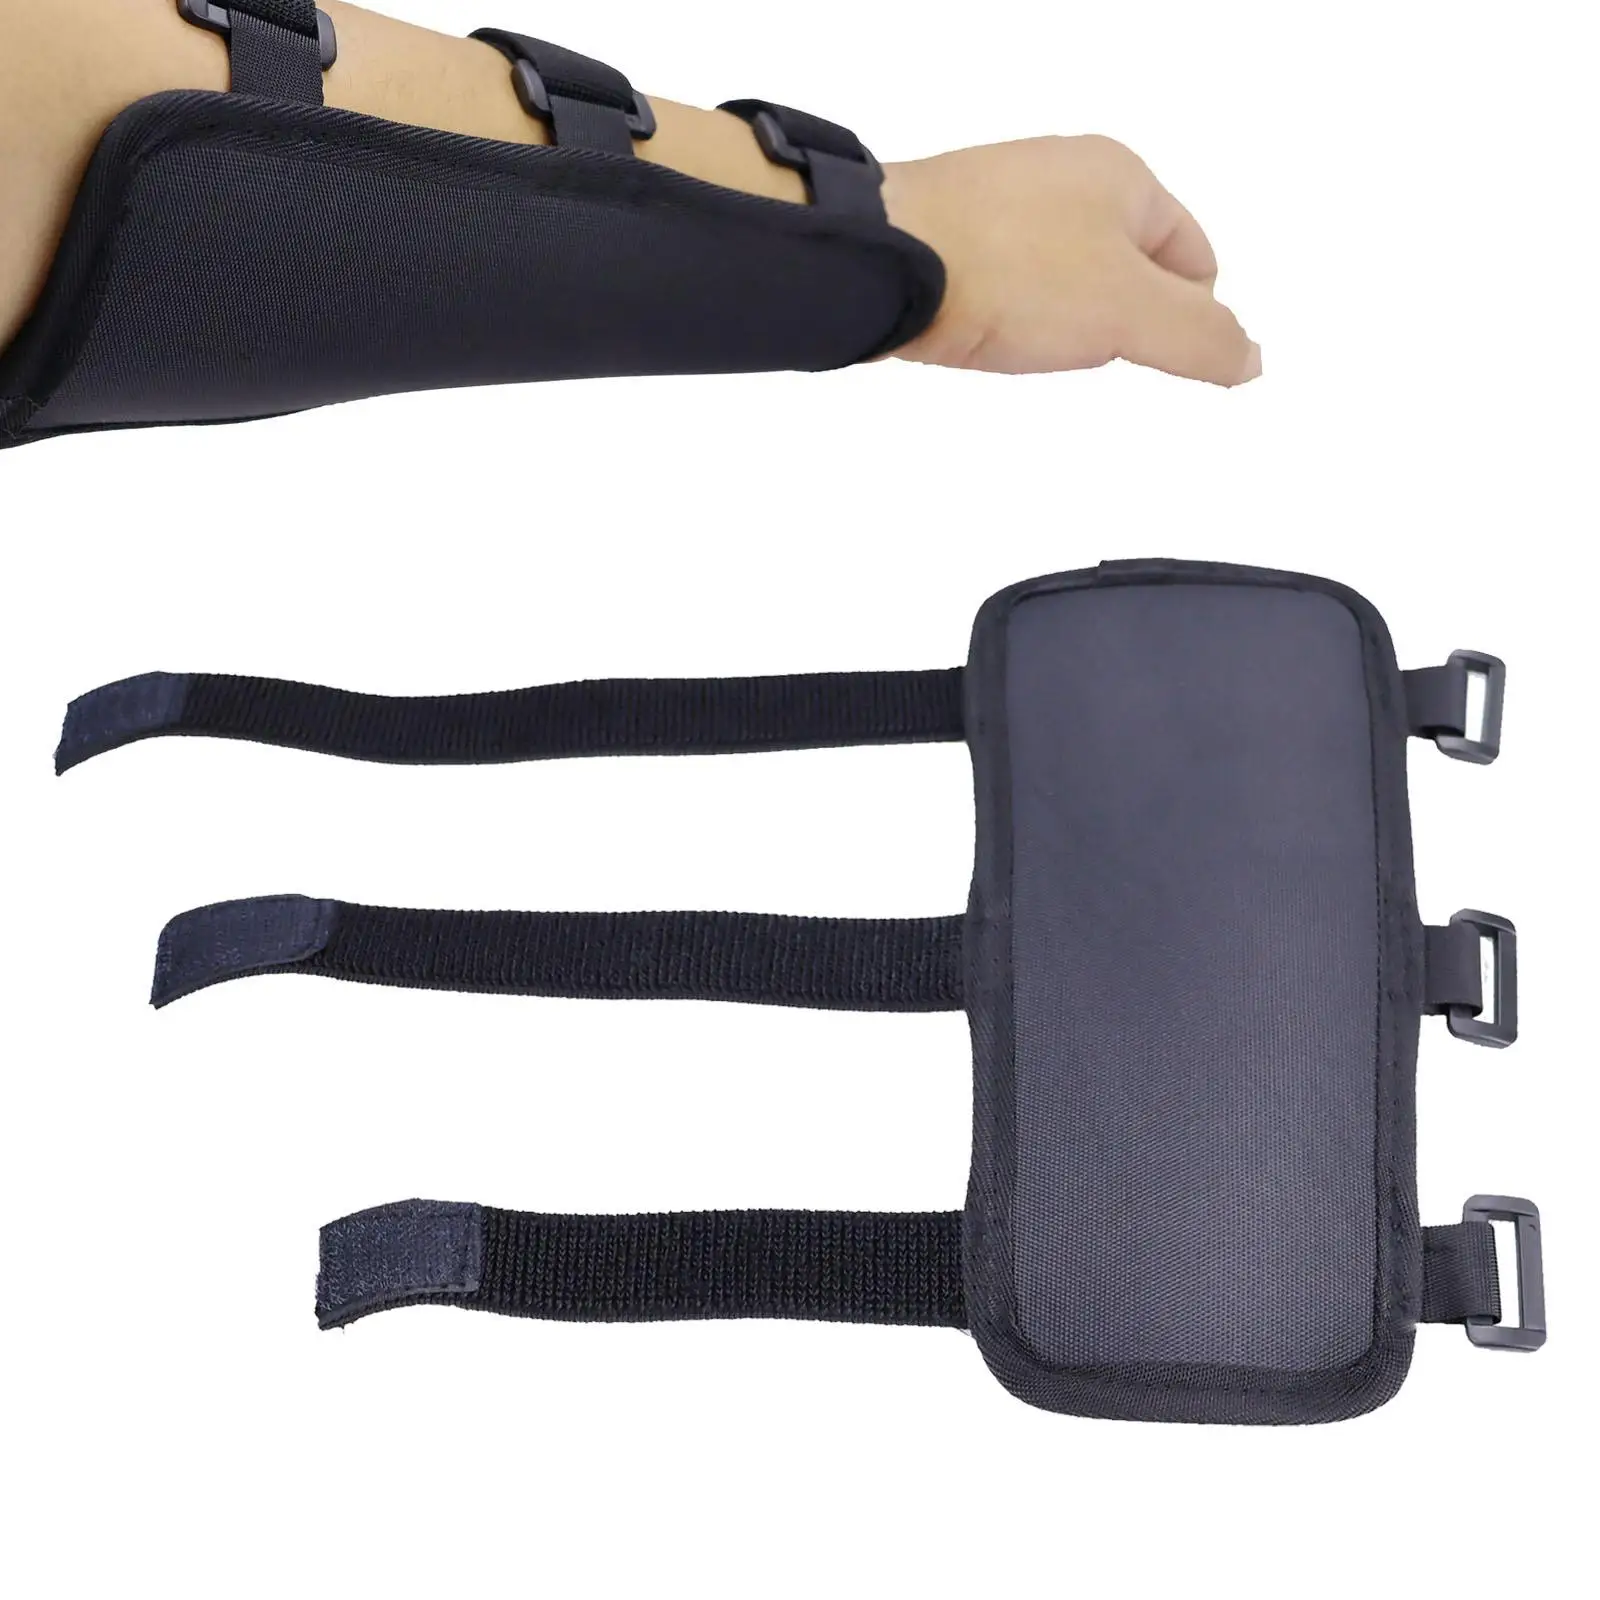 Archery Arm Protector Guard Protection Protective Gear Armband Armguard Protector for Men Practice Arrow Shooting Hunting